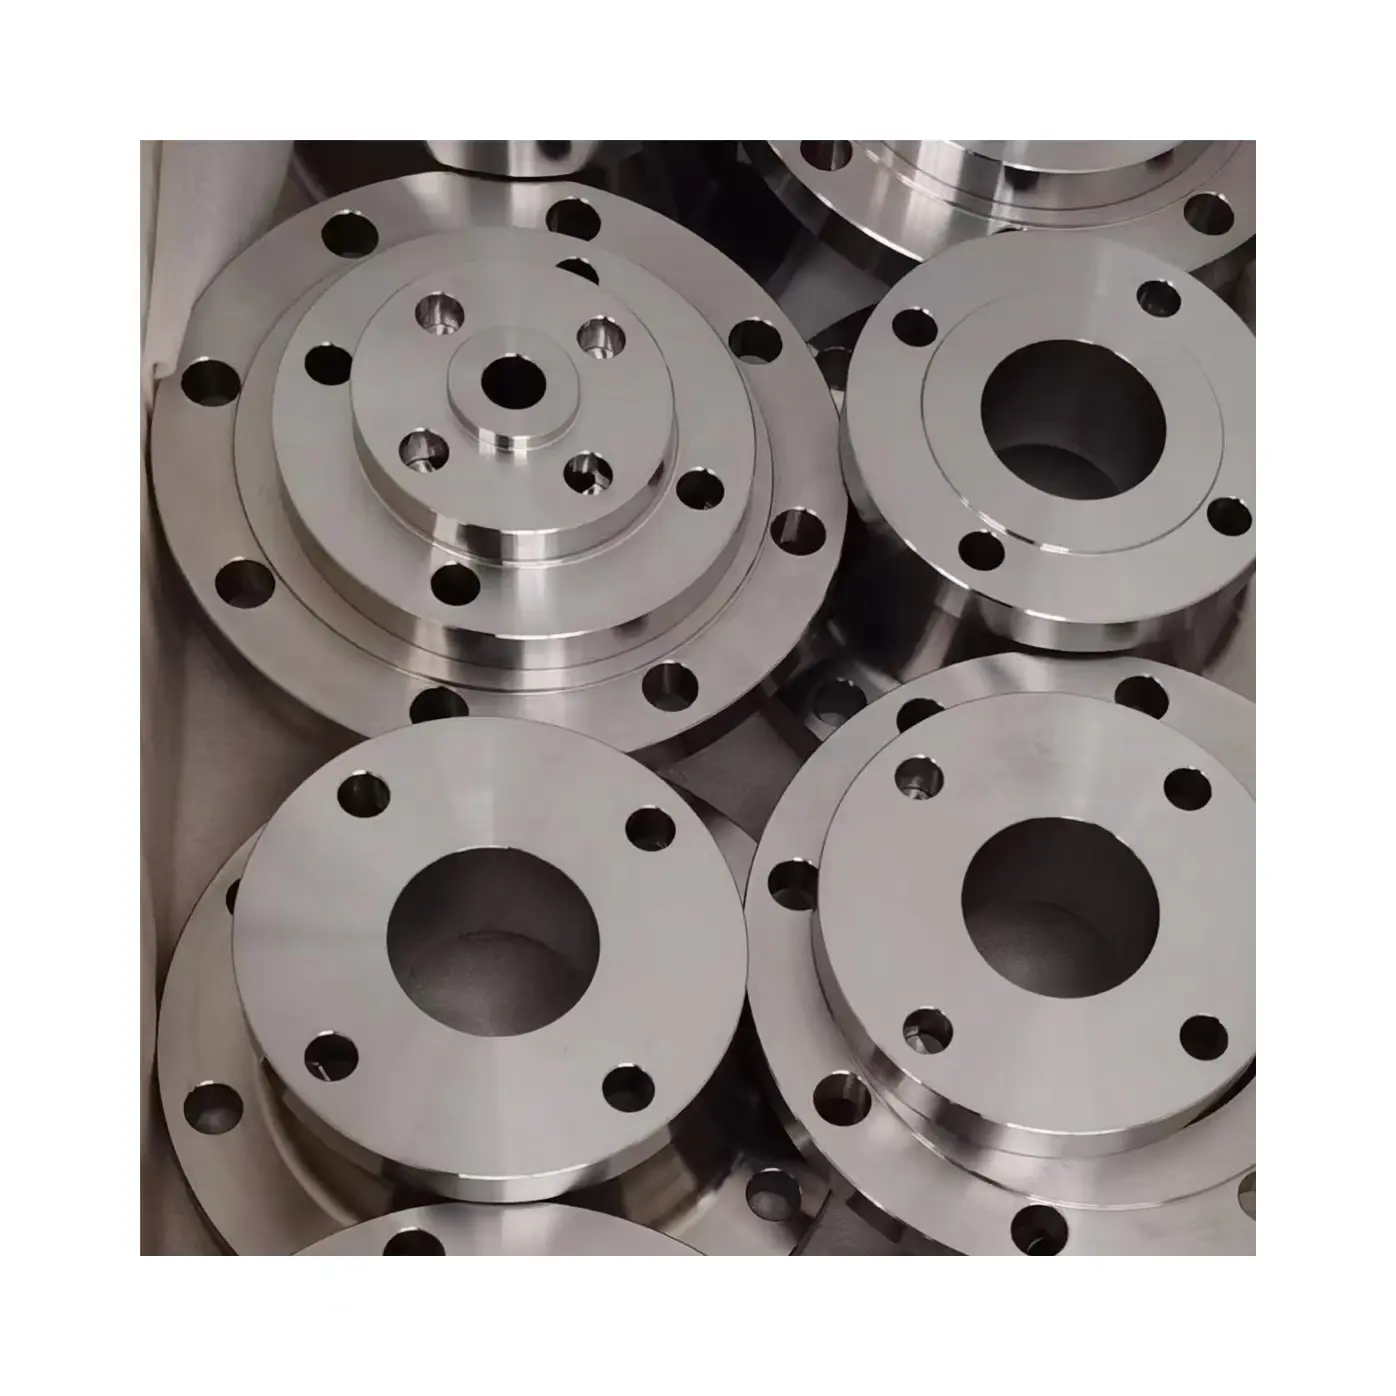 High quality series of nickel alloy flanges Incoloy 926 full size internal welded Nickel alloy flat welded flanges